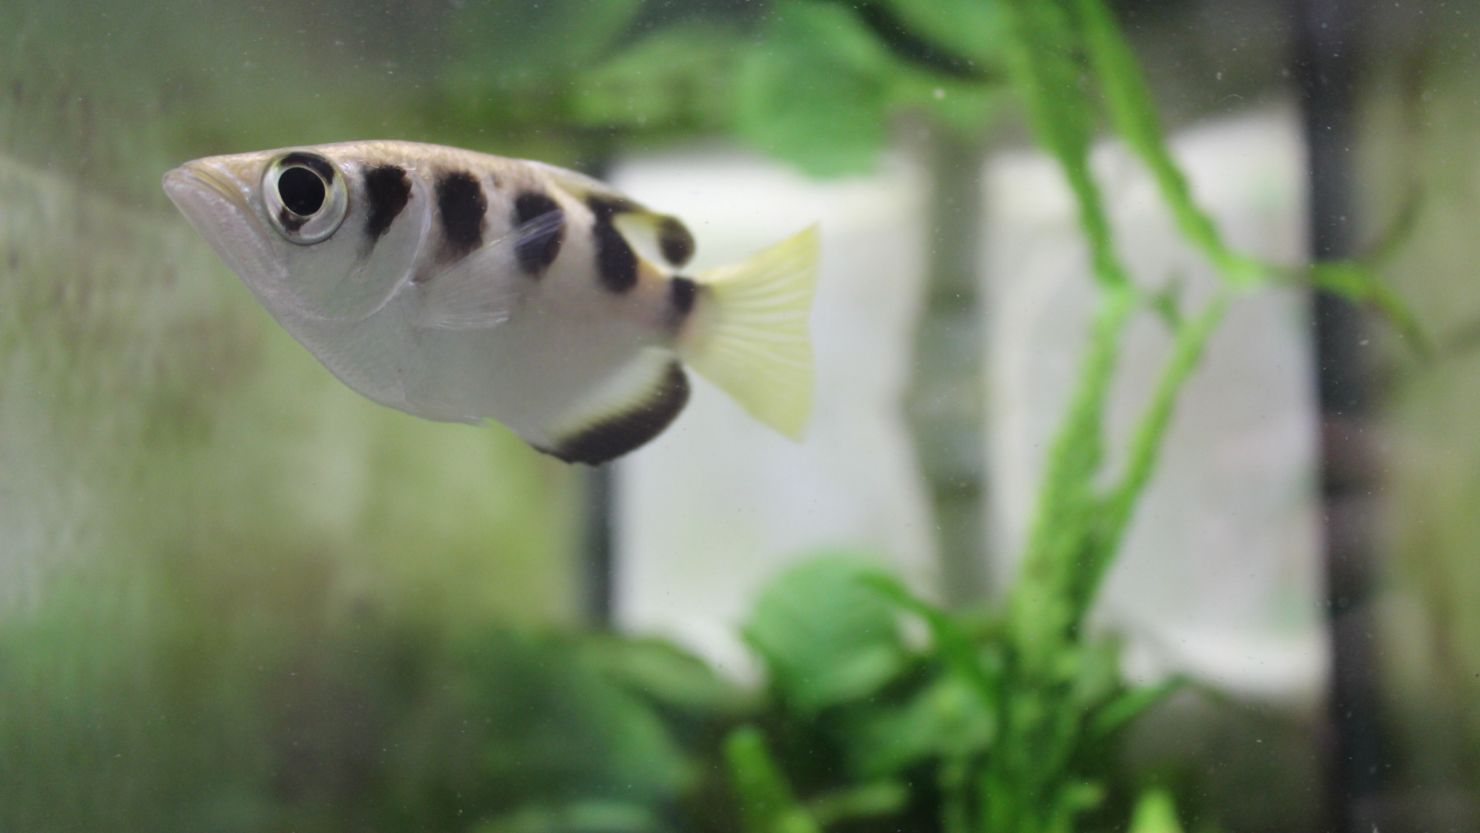 Study shows this fish can recognize human faces